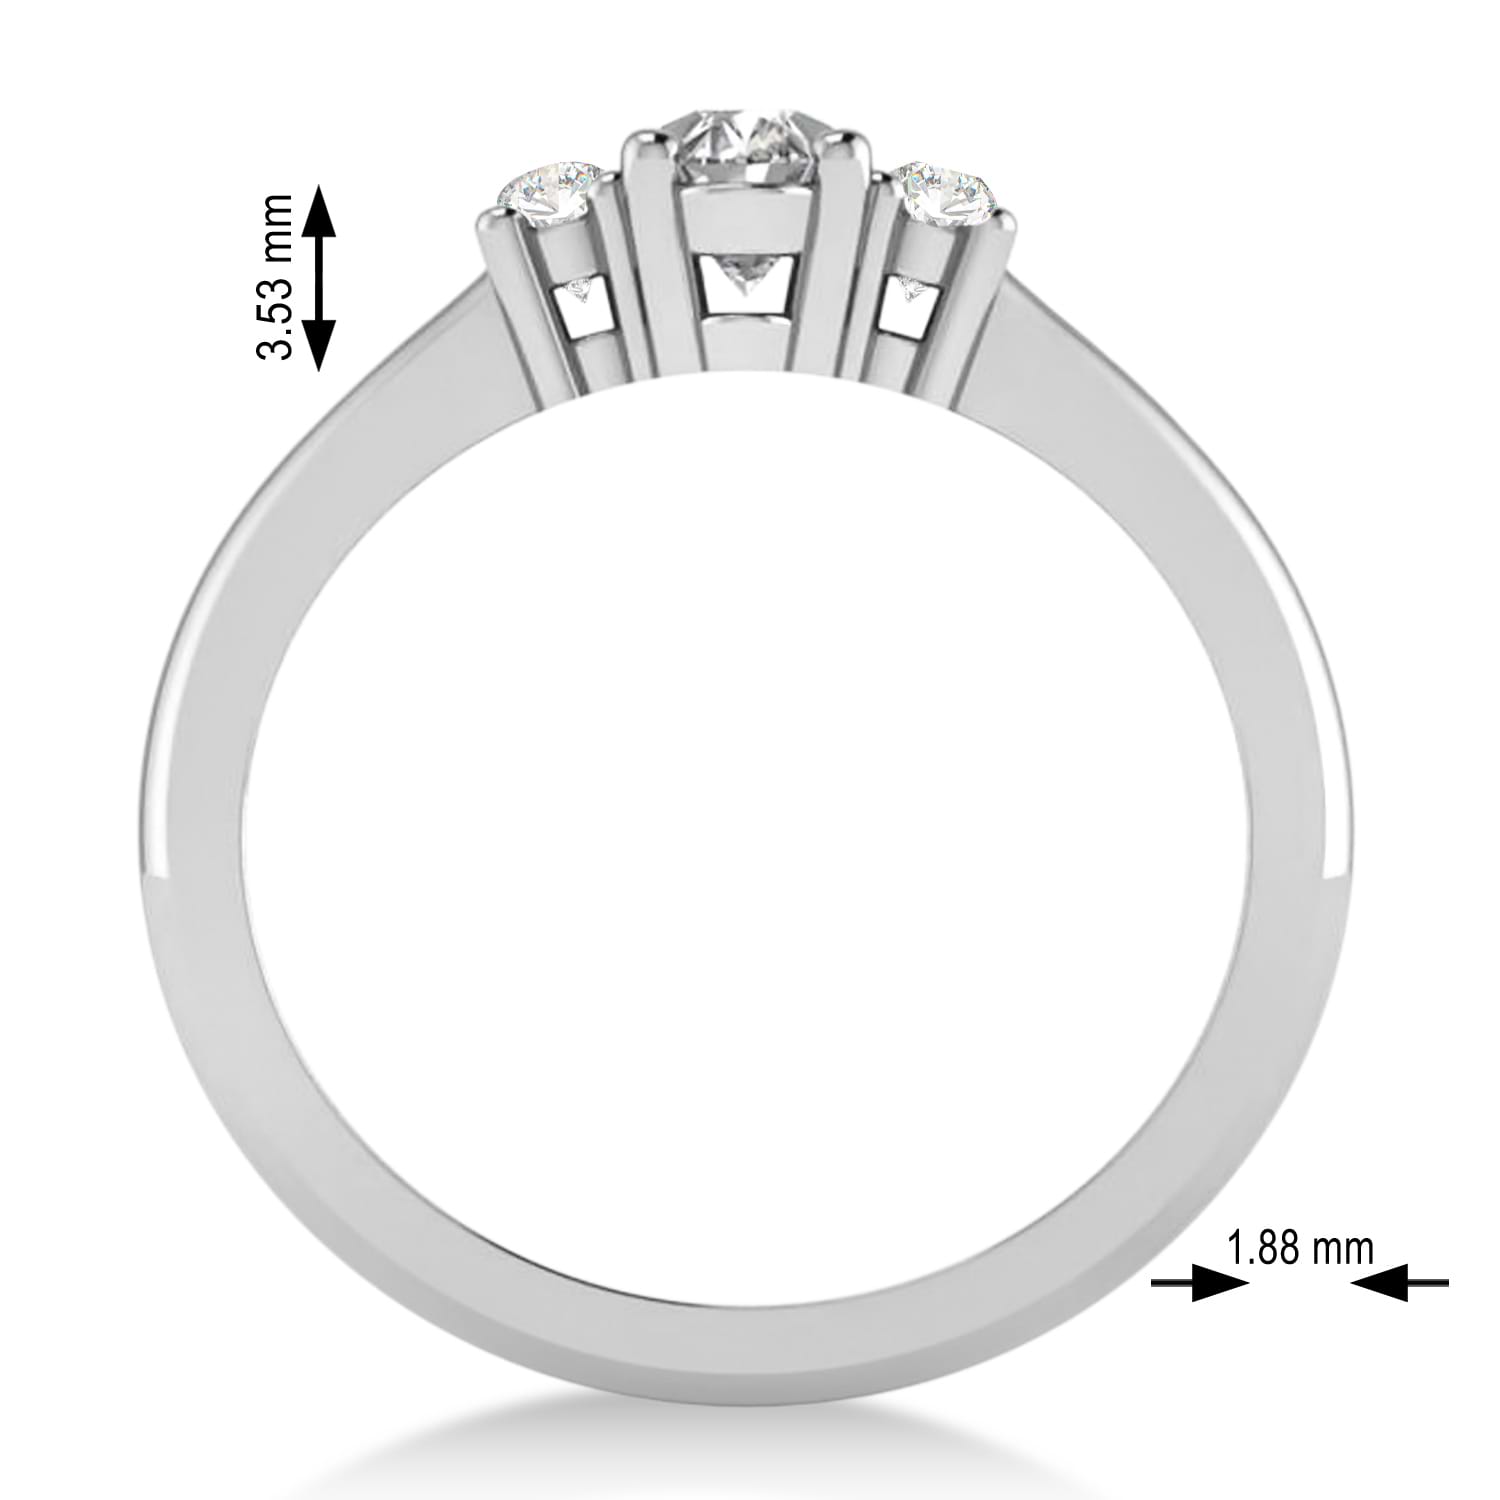 Small Oval Lab Grown Diamond Three-Stone Engagement Ring 14k White Gold (0.60ct)